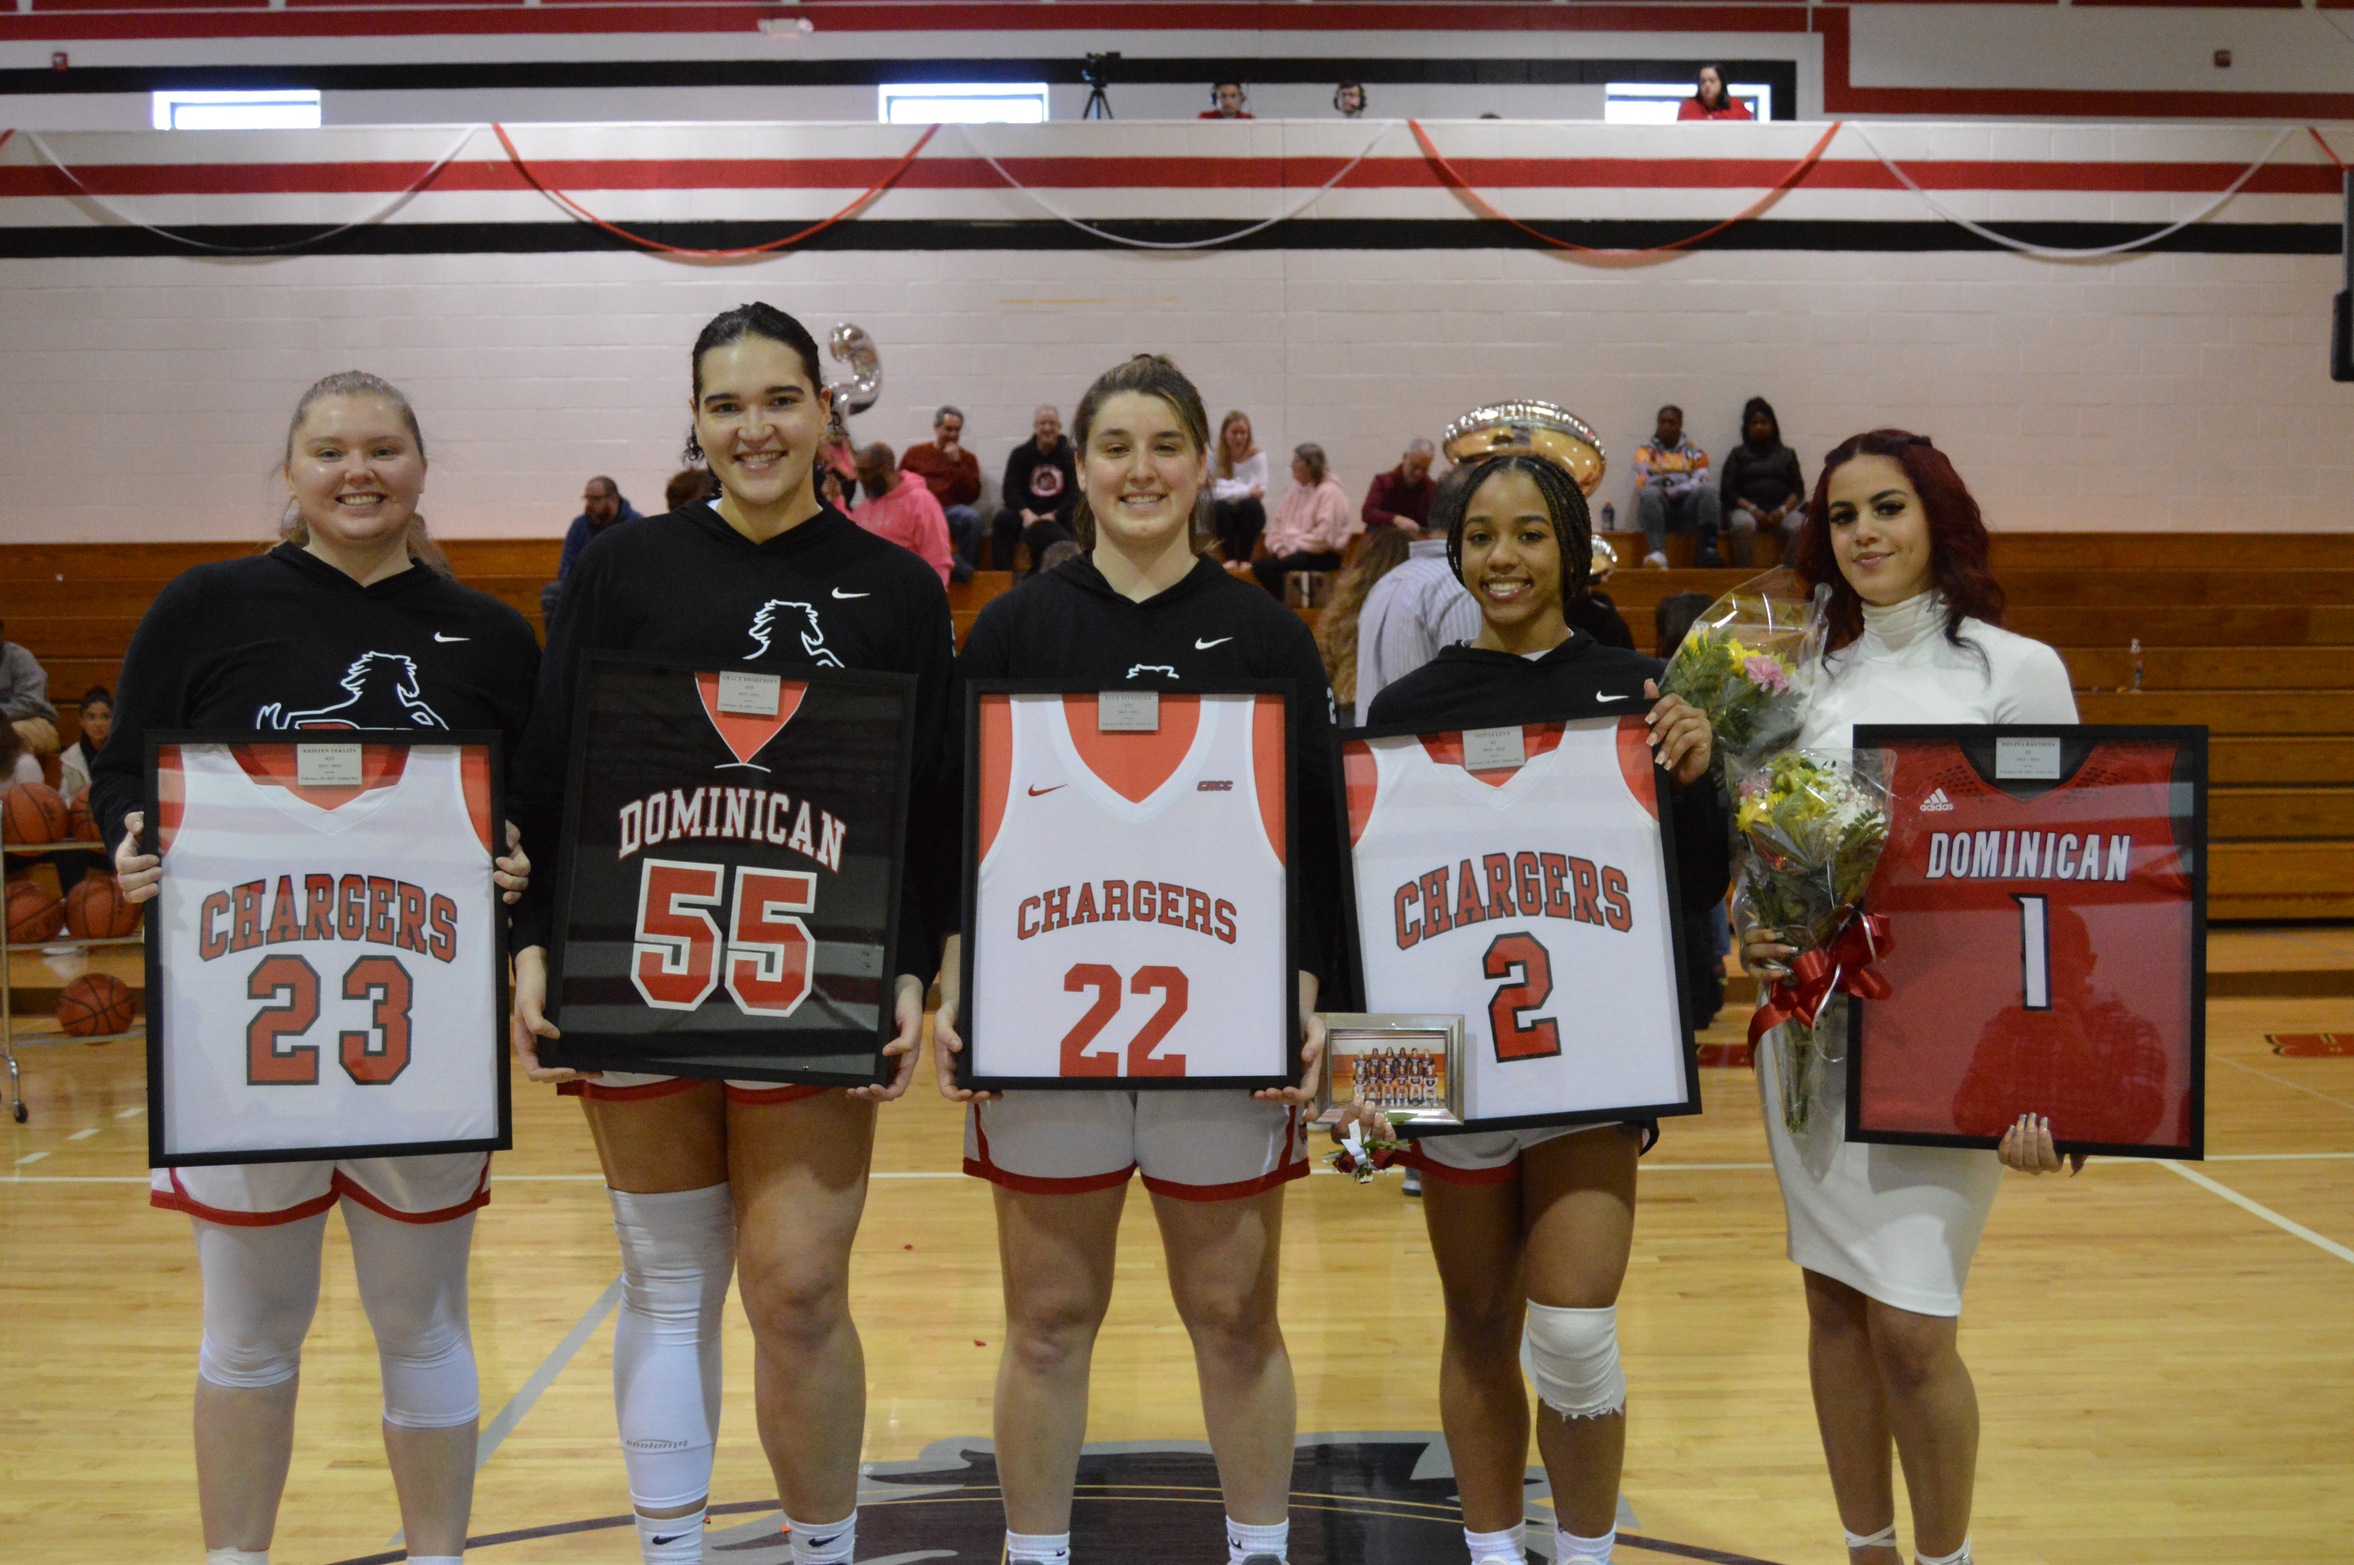 LADY CHARGERS EARN COMEBACK VICTORY ON SENIOR DAY